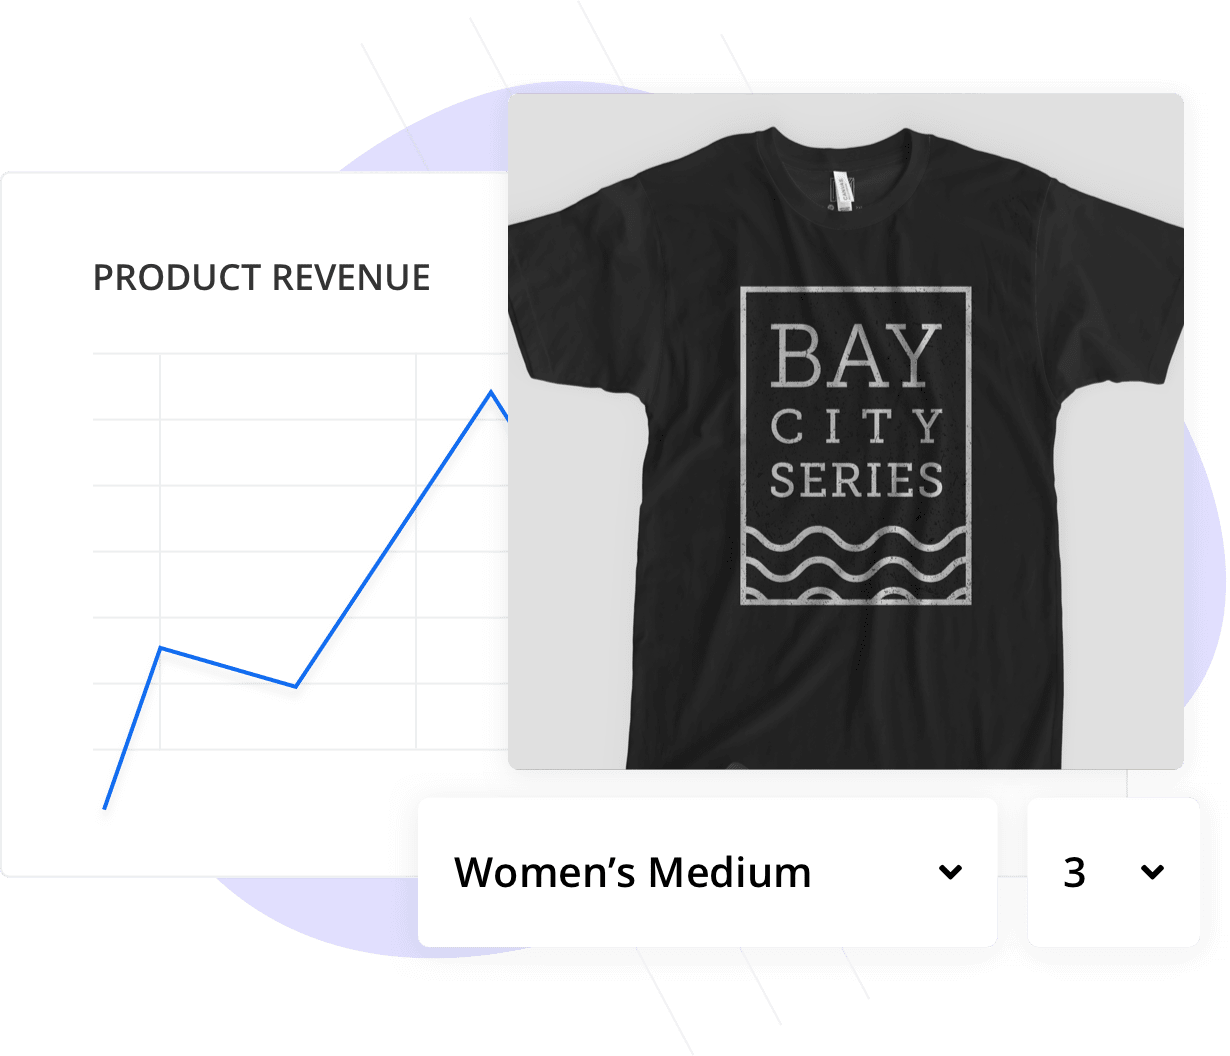 Product revenue chart and image of branded t-shirt